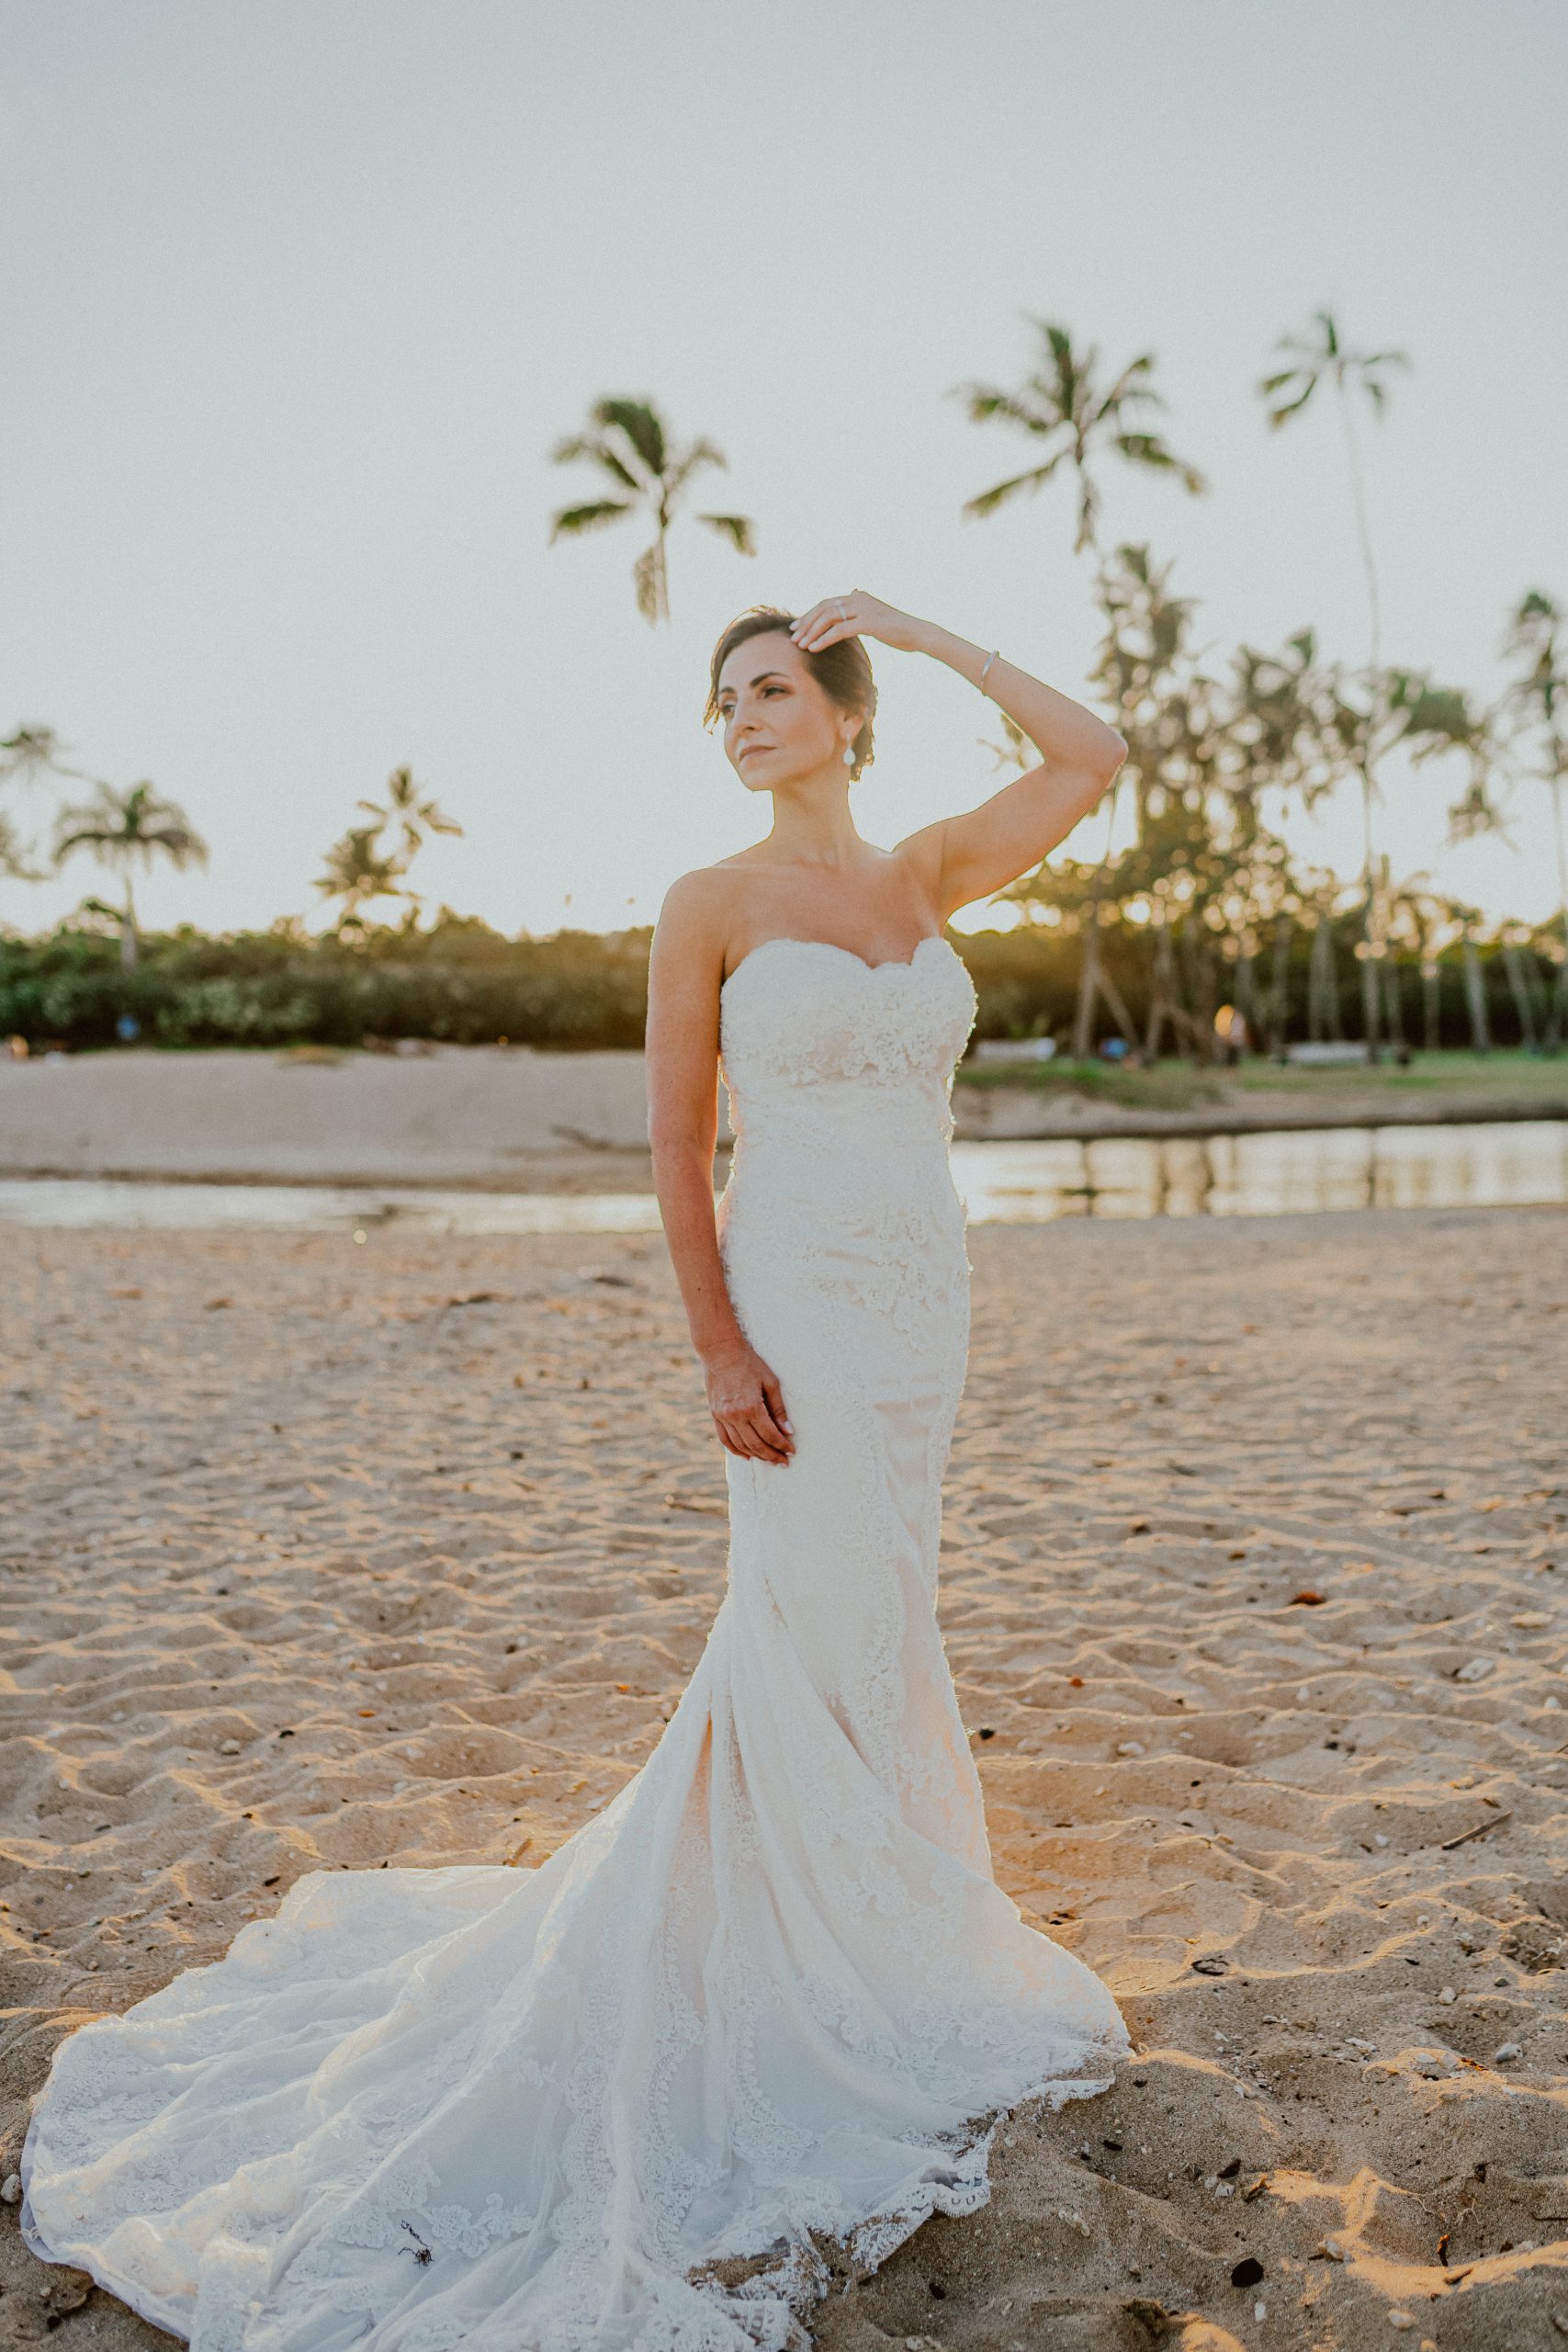 Bride models her white lace strapless style wedding dress at sunset on the Oahu beach after her traditional Hawaiian church ceremony | Oahu Wedding Photographer, Oahu Elopement Photographer, Destination Wedding Photographer, Destination Elopement Photographer, Newlywed moments ideas, Newlywed Photography inspiration, Hawaii Elopement ideas | chelseaabril.com